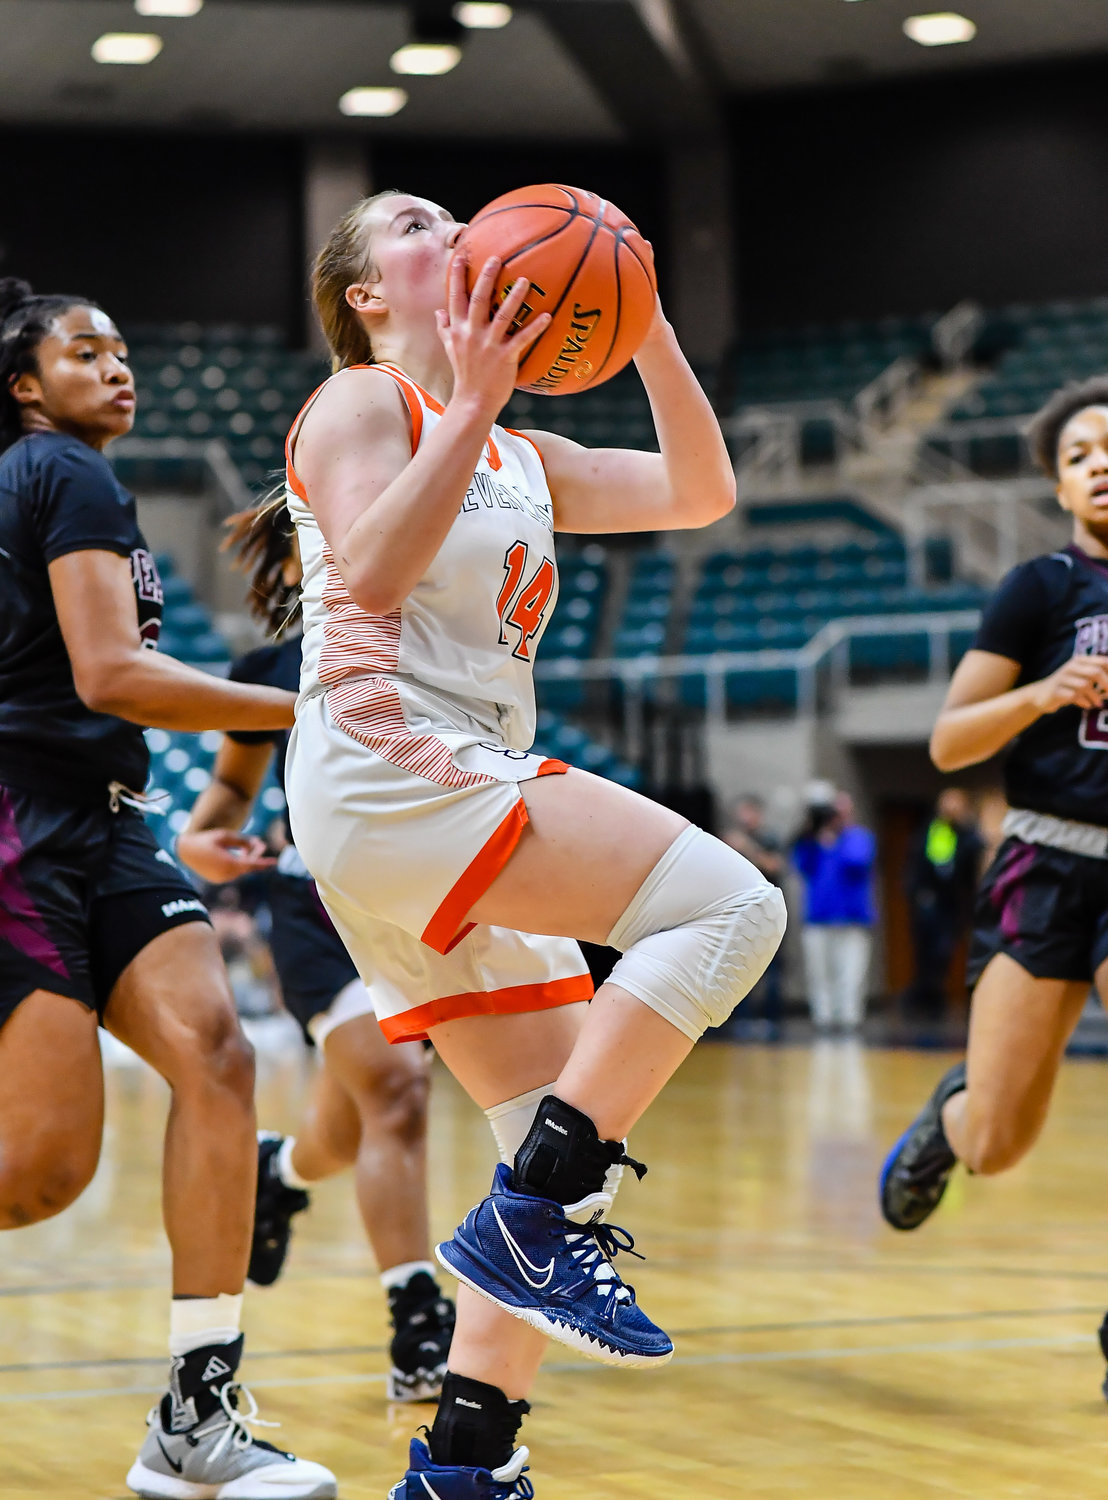 Katy Tx. Feb 25, 2022:  Seven Lakes Shea Mcfarland #14 drives to the basket during the Regional SemiFinal playoff game, Seven Lakes vs Pearland at the Merrell Center. (Photo by Mark Goodman / Katy Times)